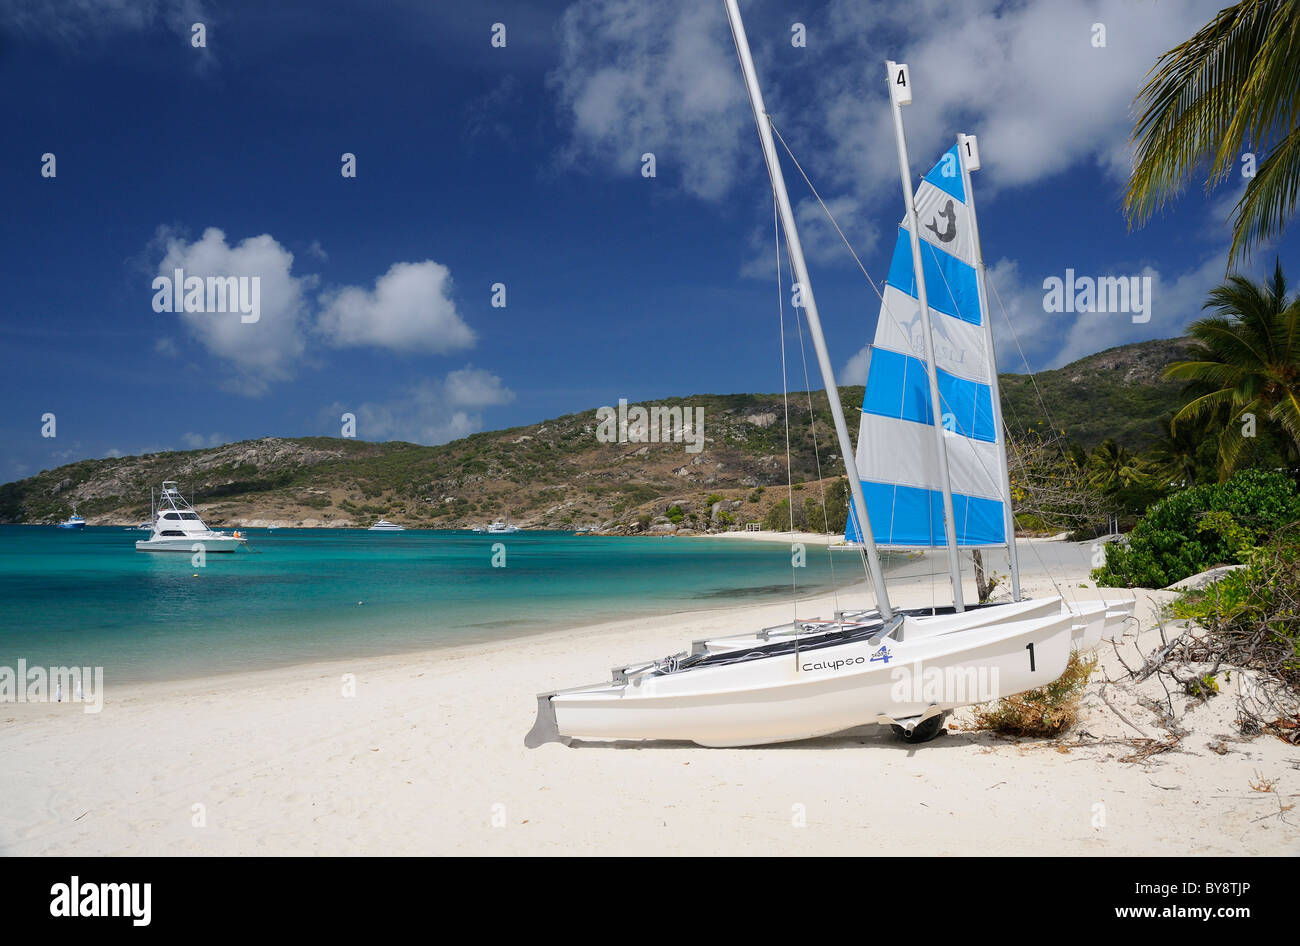 Catamarans with blue and white striped sail on Anchor Bay, Lizard Island, Great Barrier Reef, Queensland, Australia Stock Photo